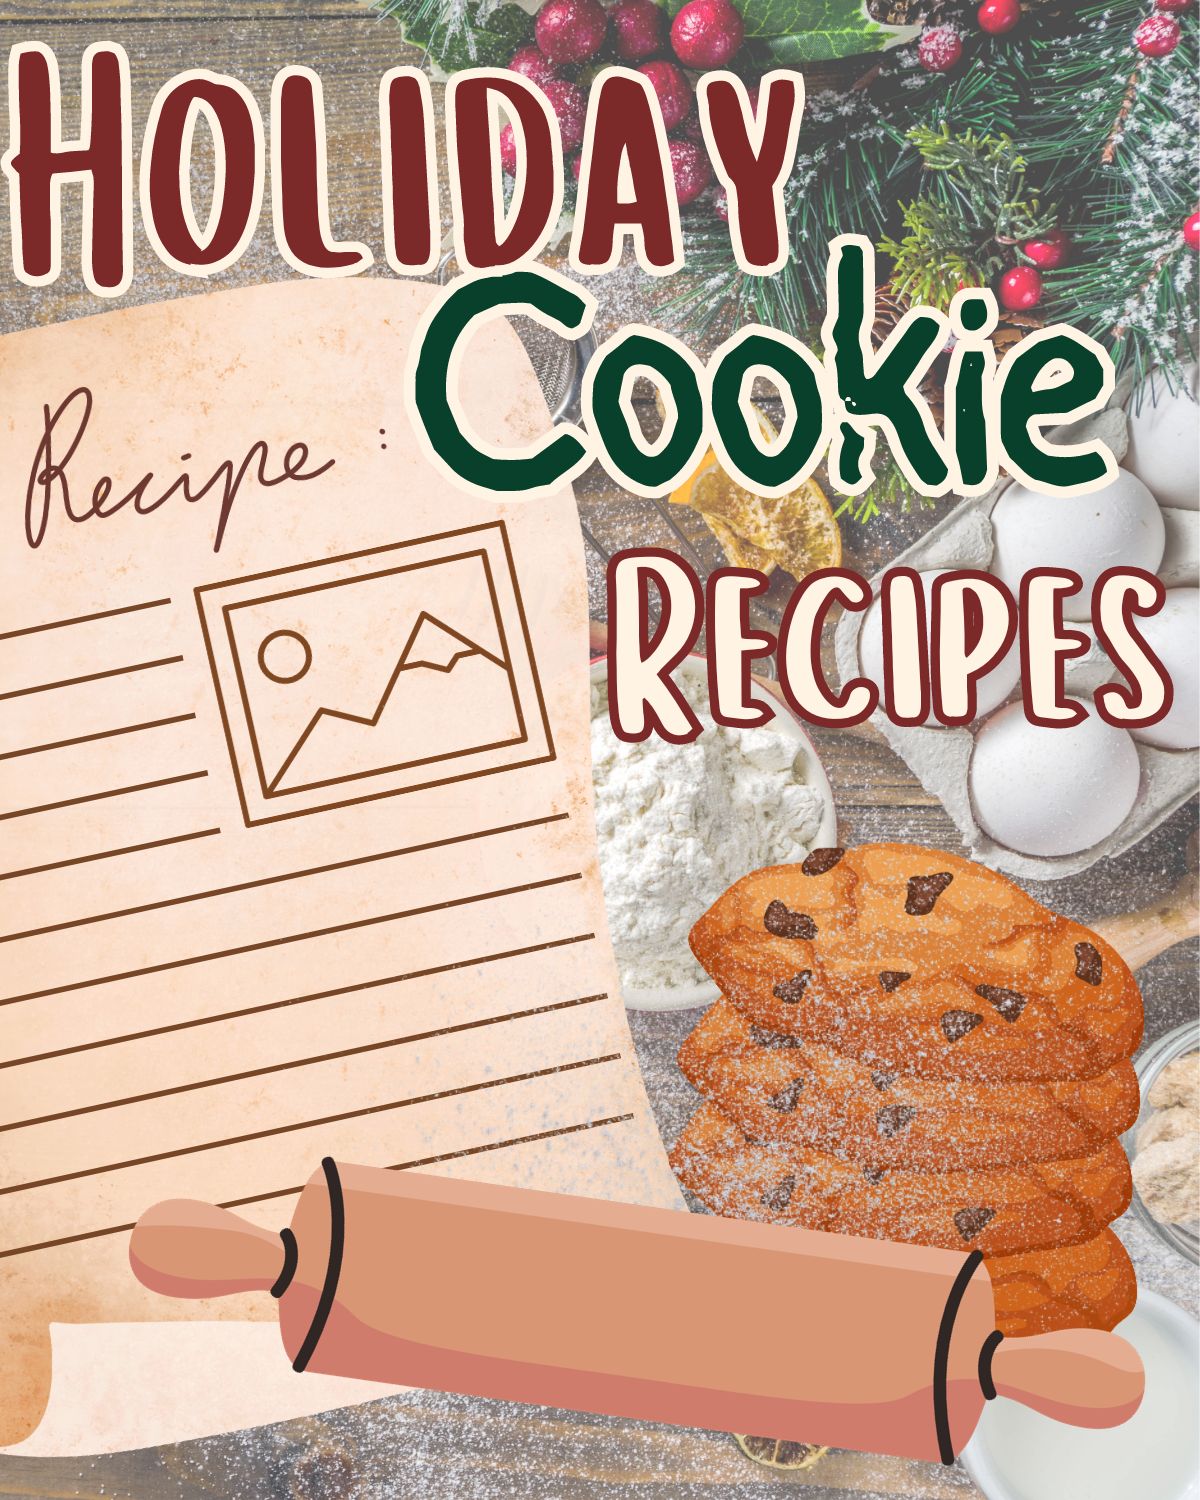 Holiday Cookie Recipes: with a recipe card, rolling pin and stack of cookies